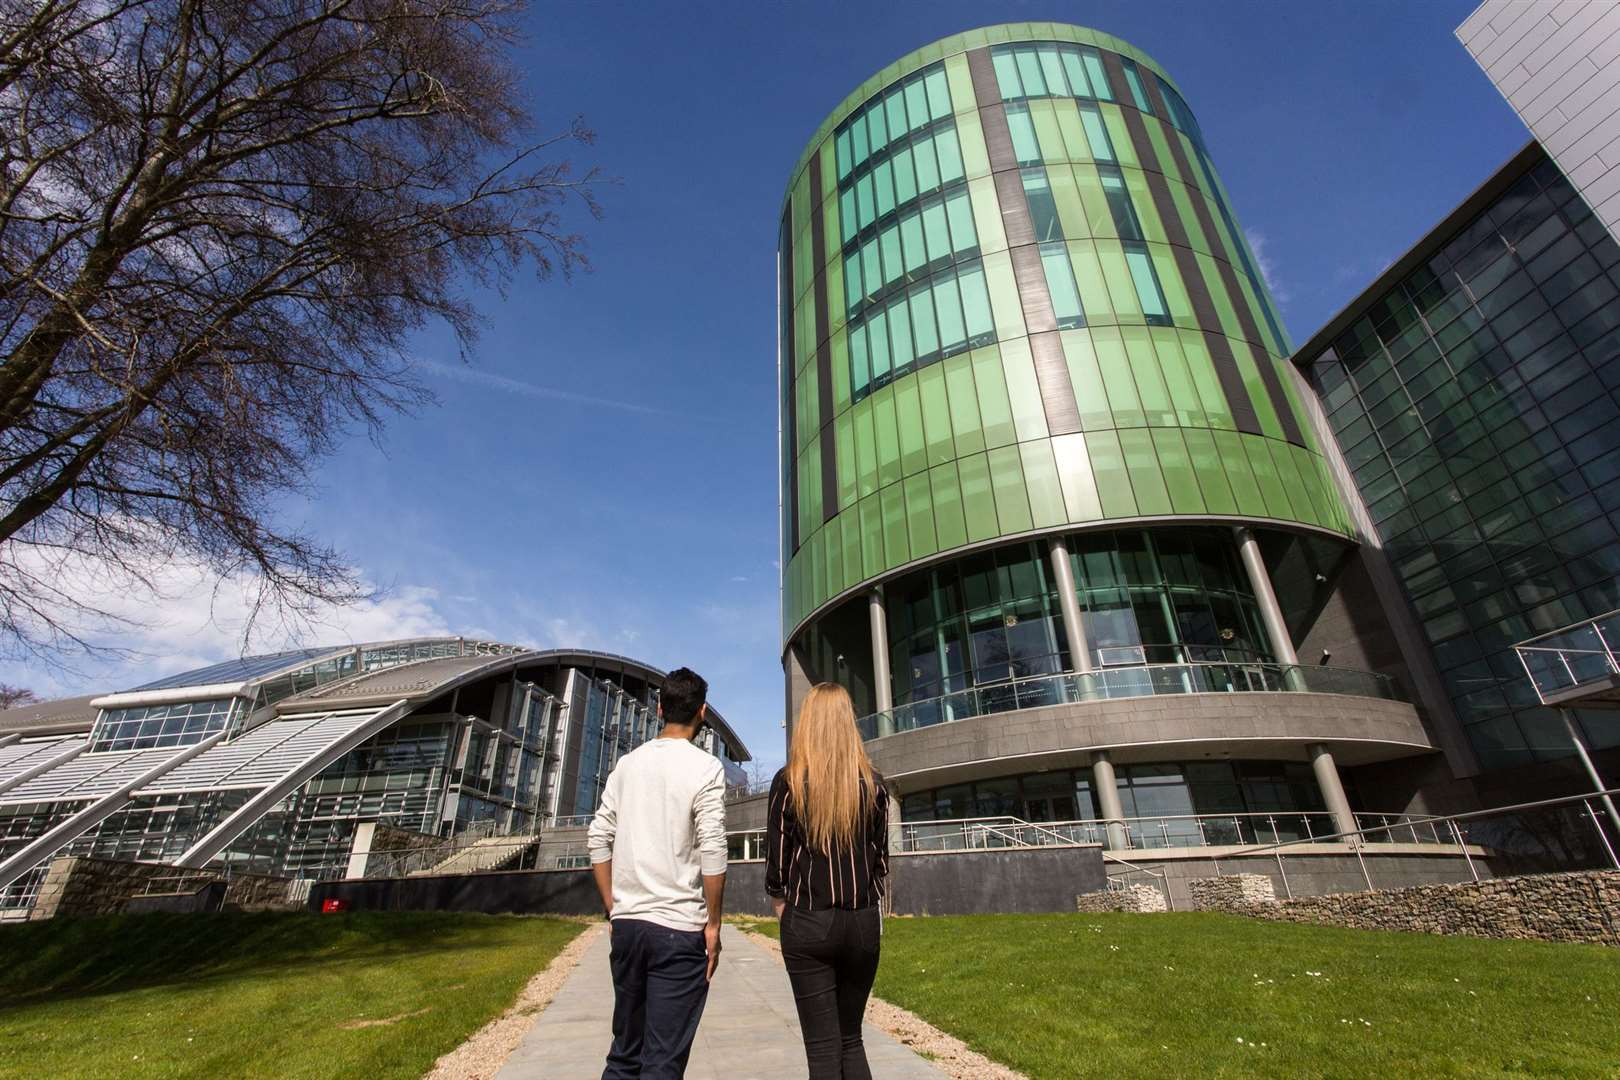 RGU's new courses aim to help north-east businesses in the tourism and food and drink industries.